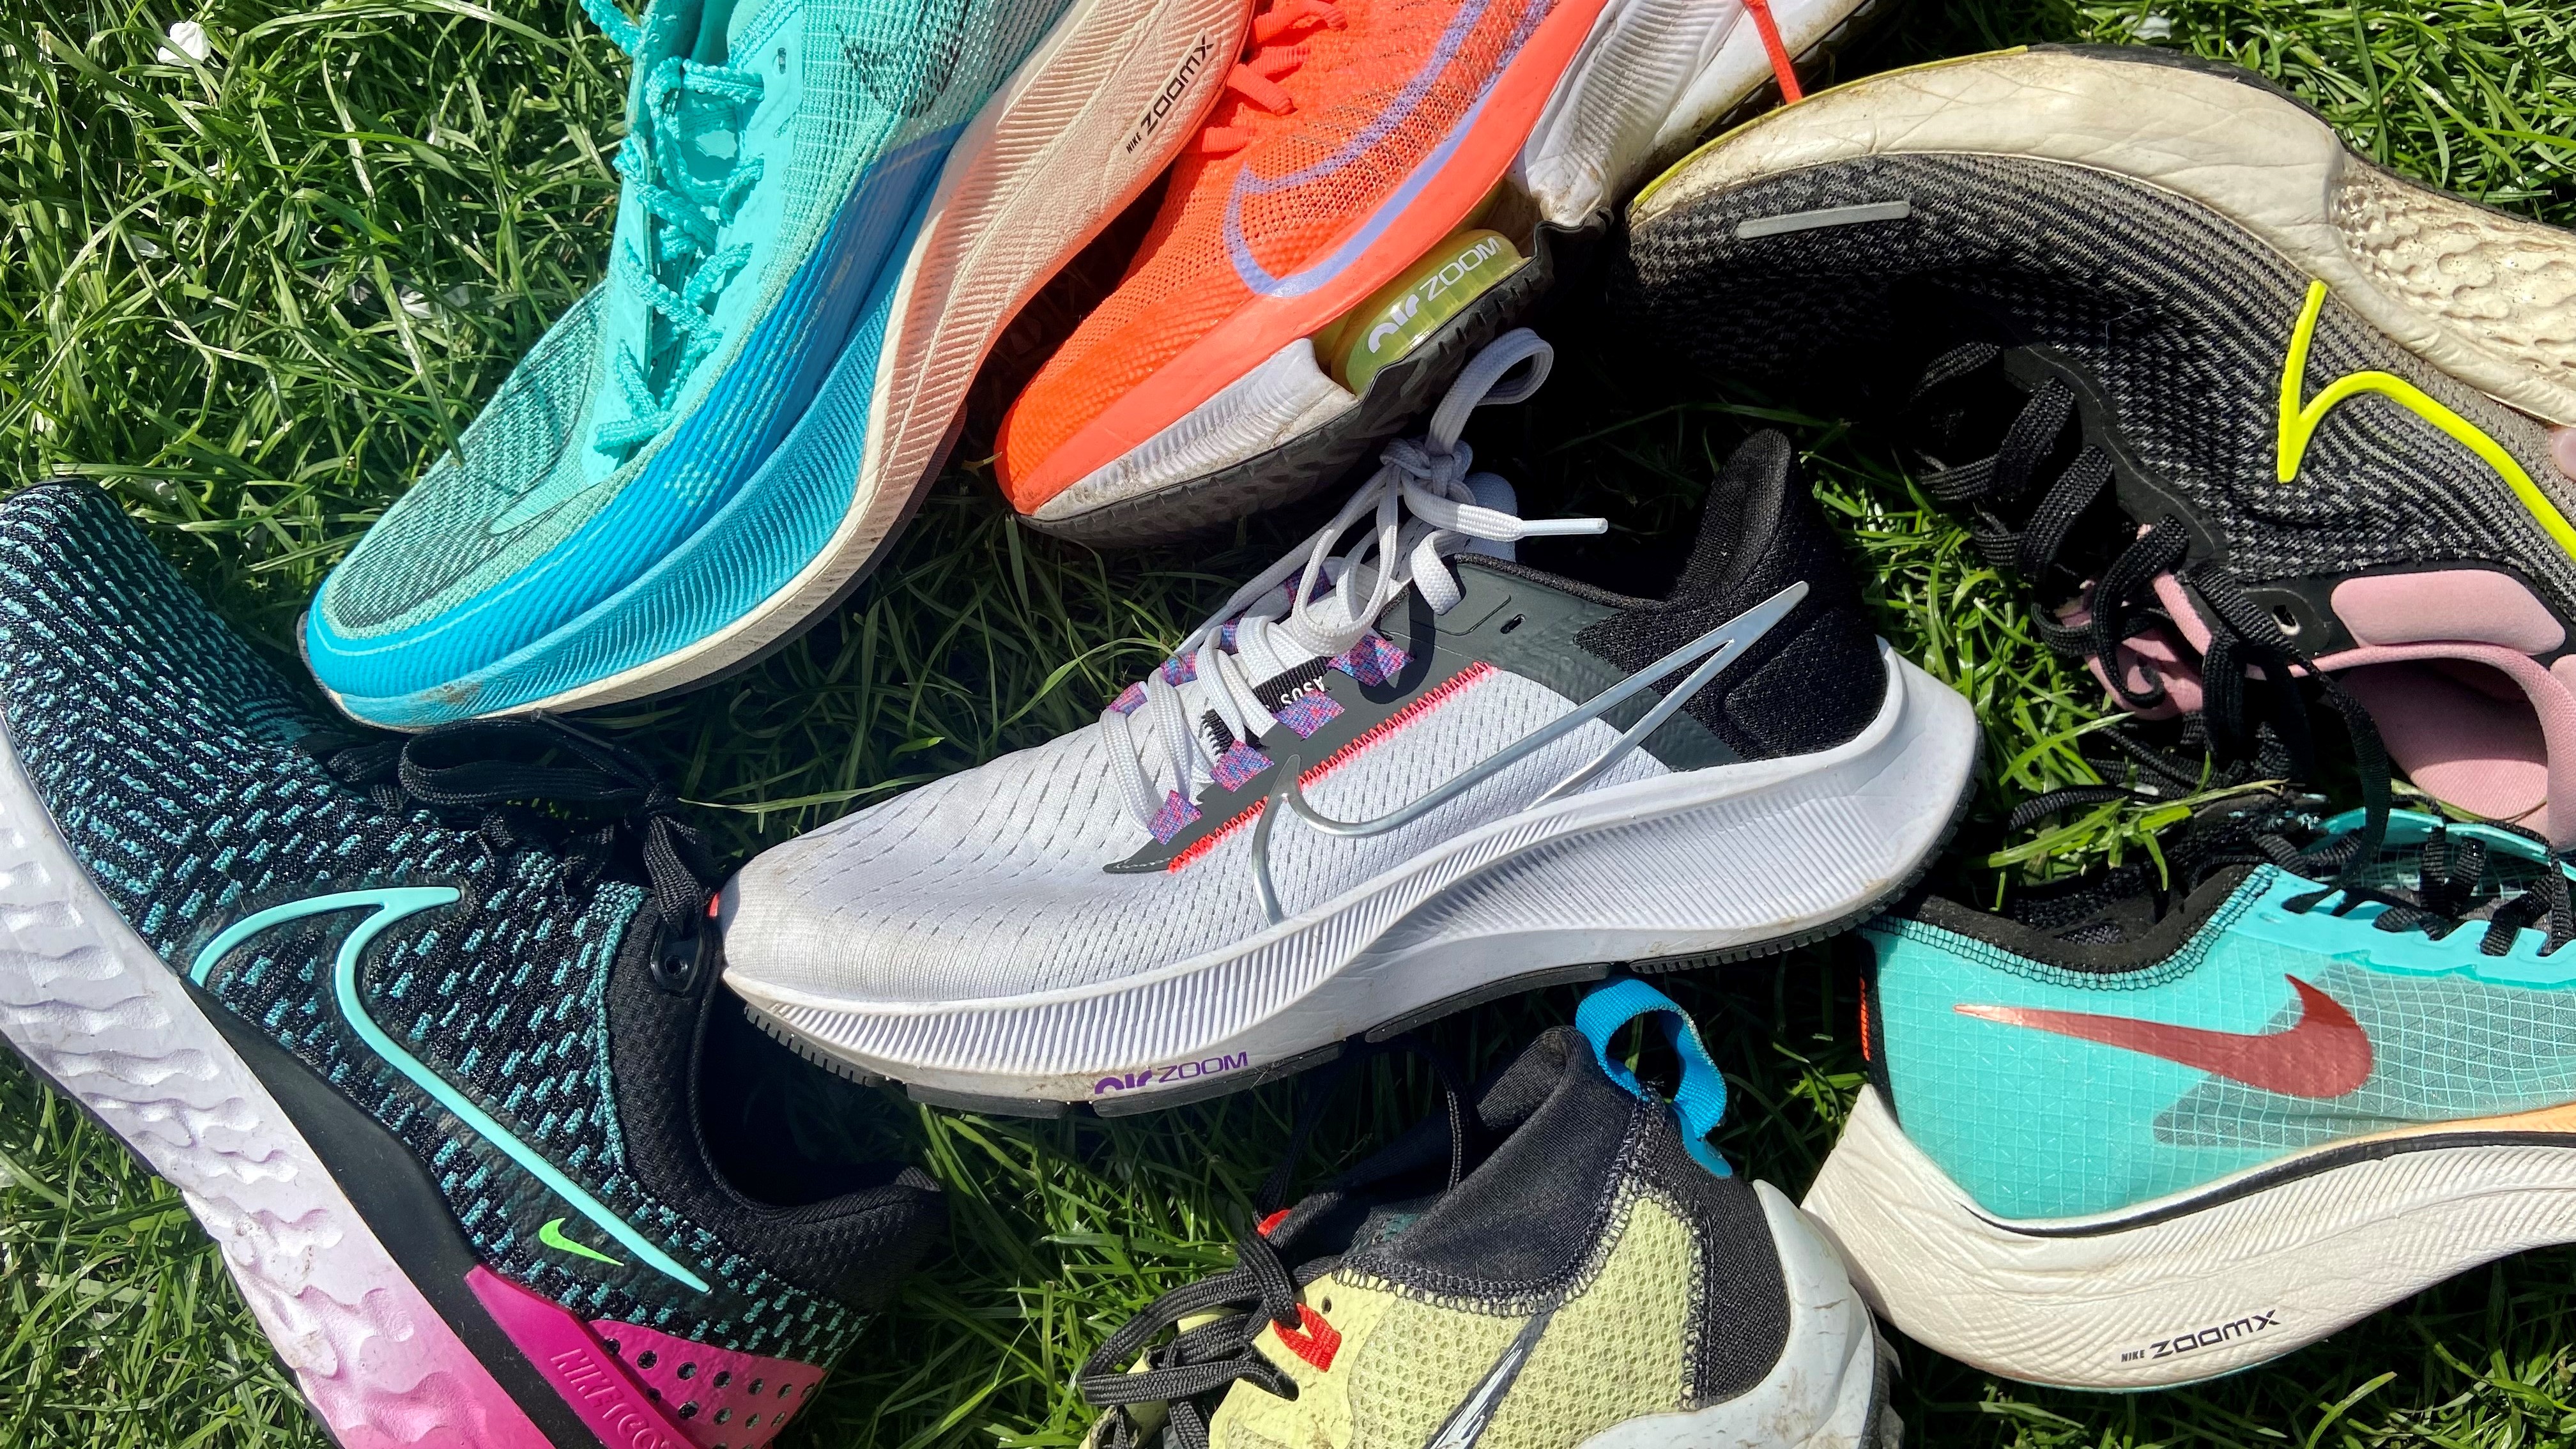 The best nike training sneakers Nike running shoes 2022 | Tom's Guide